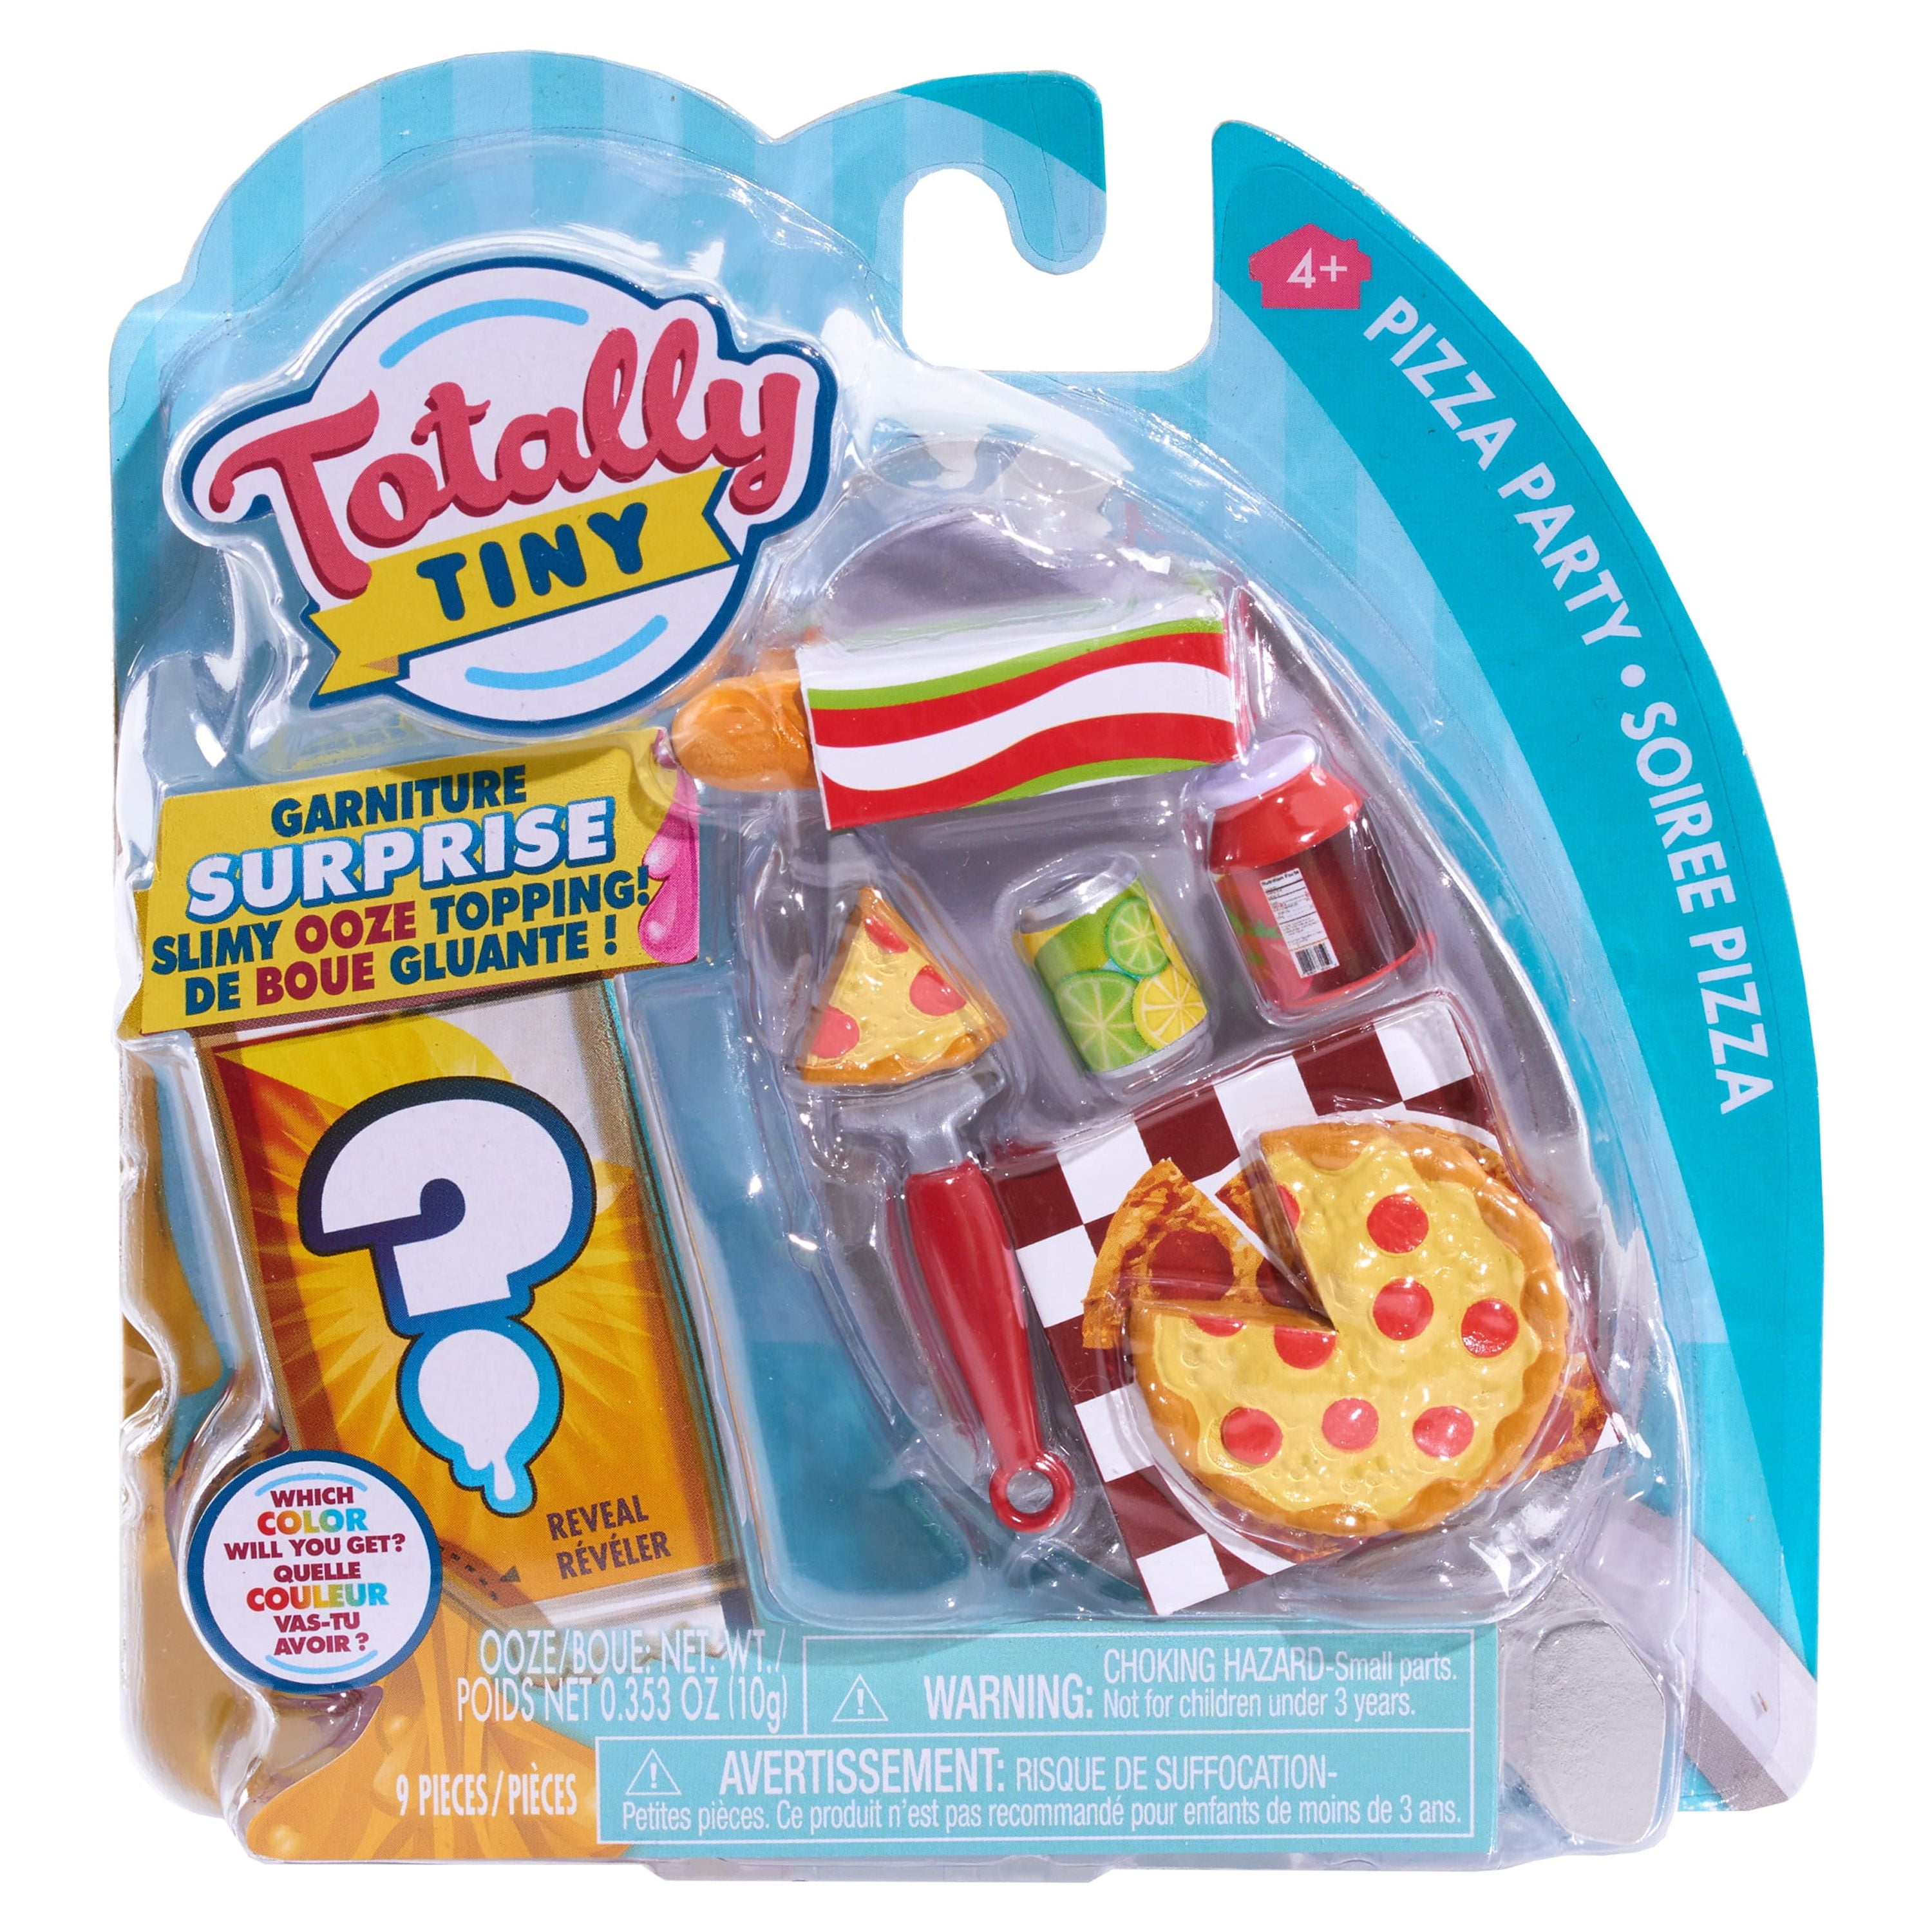 Totally Tiny Fun with Food Sets, Pizza Party, Kids Toys for Ages 4 Up,  Gifts and Presents 